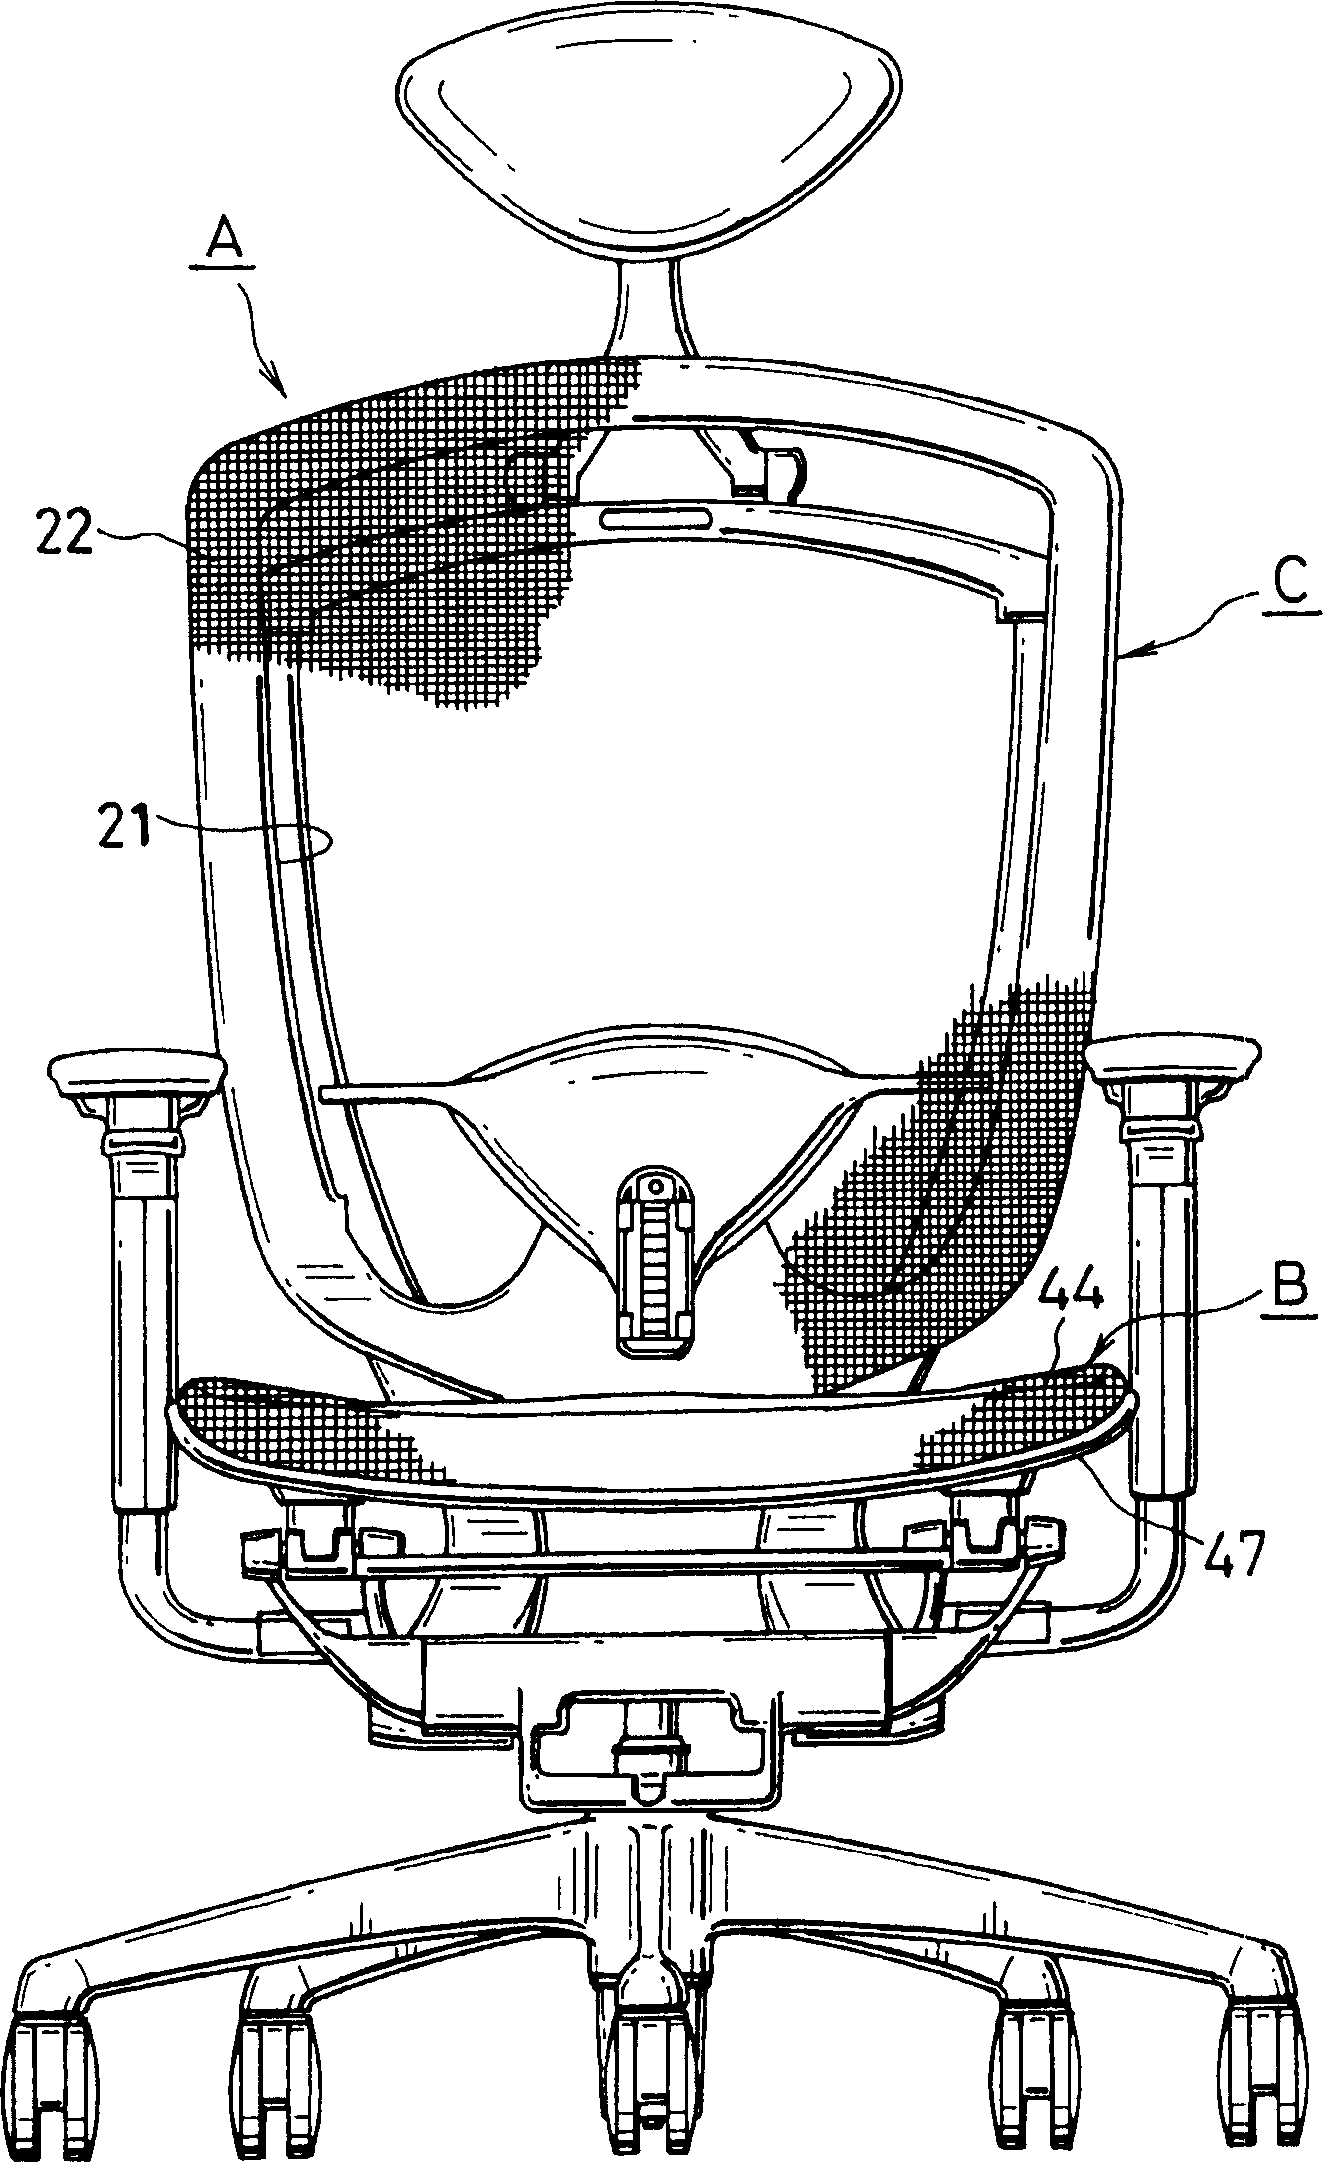 Construction for attaching net member to chair seat or backrest frame